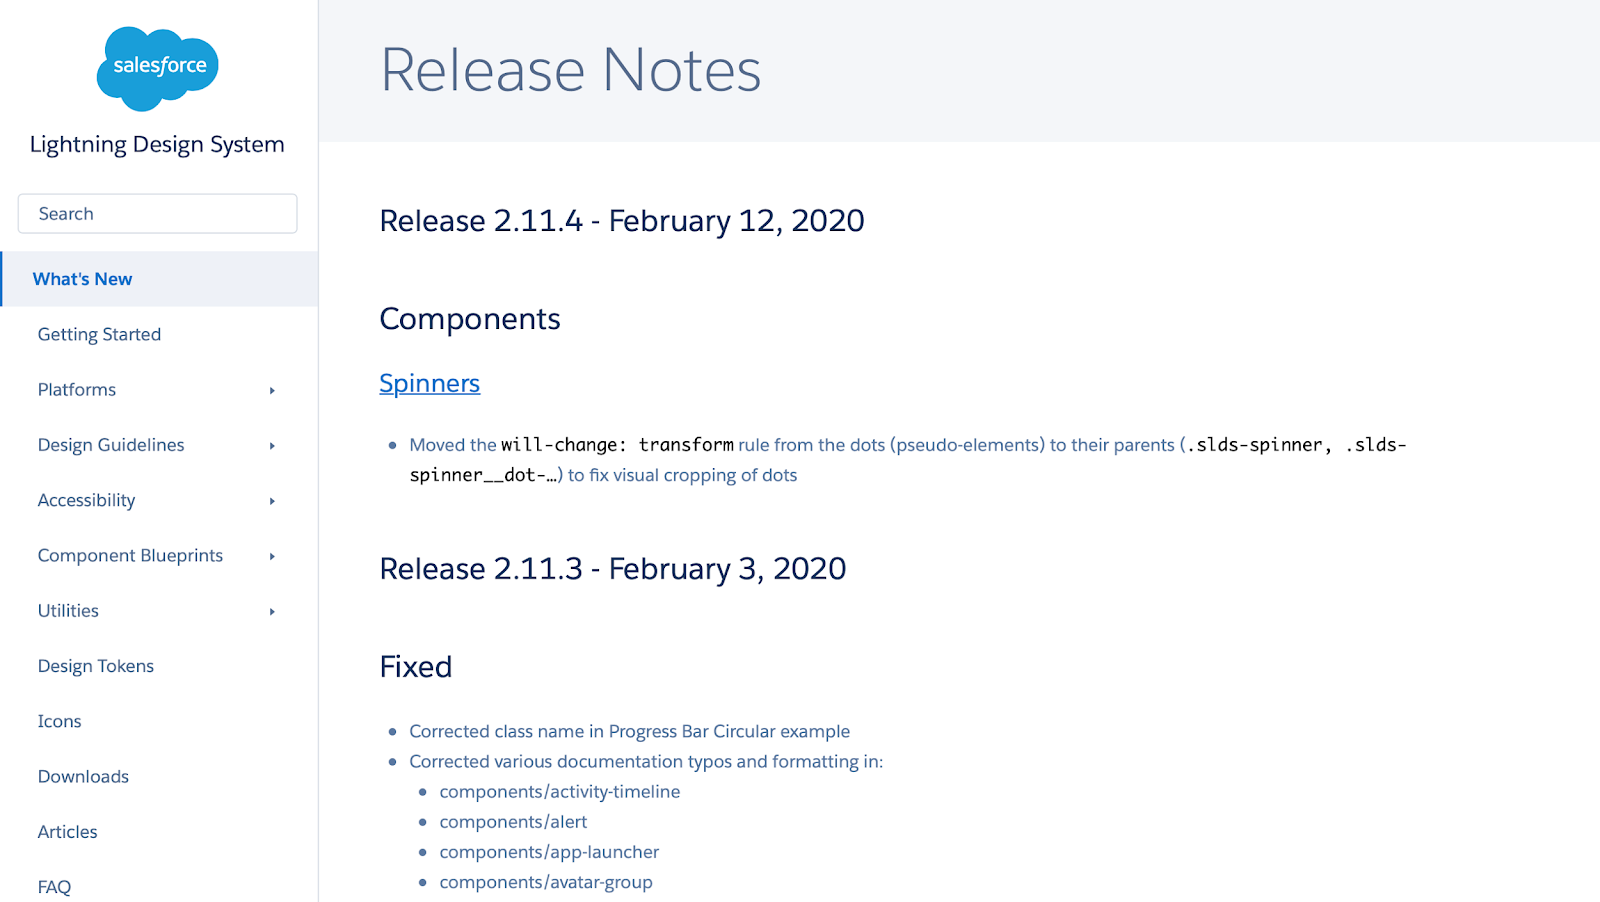 Release notes for Salesforce’s Lightning Design System feature the release date.